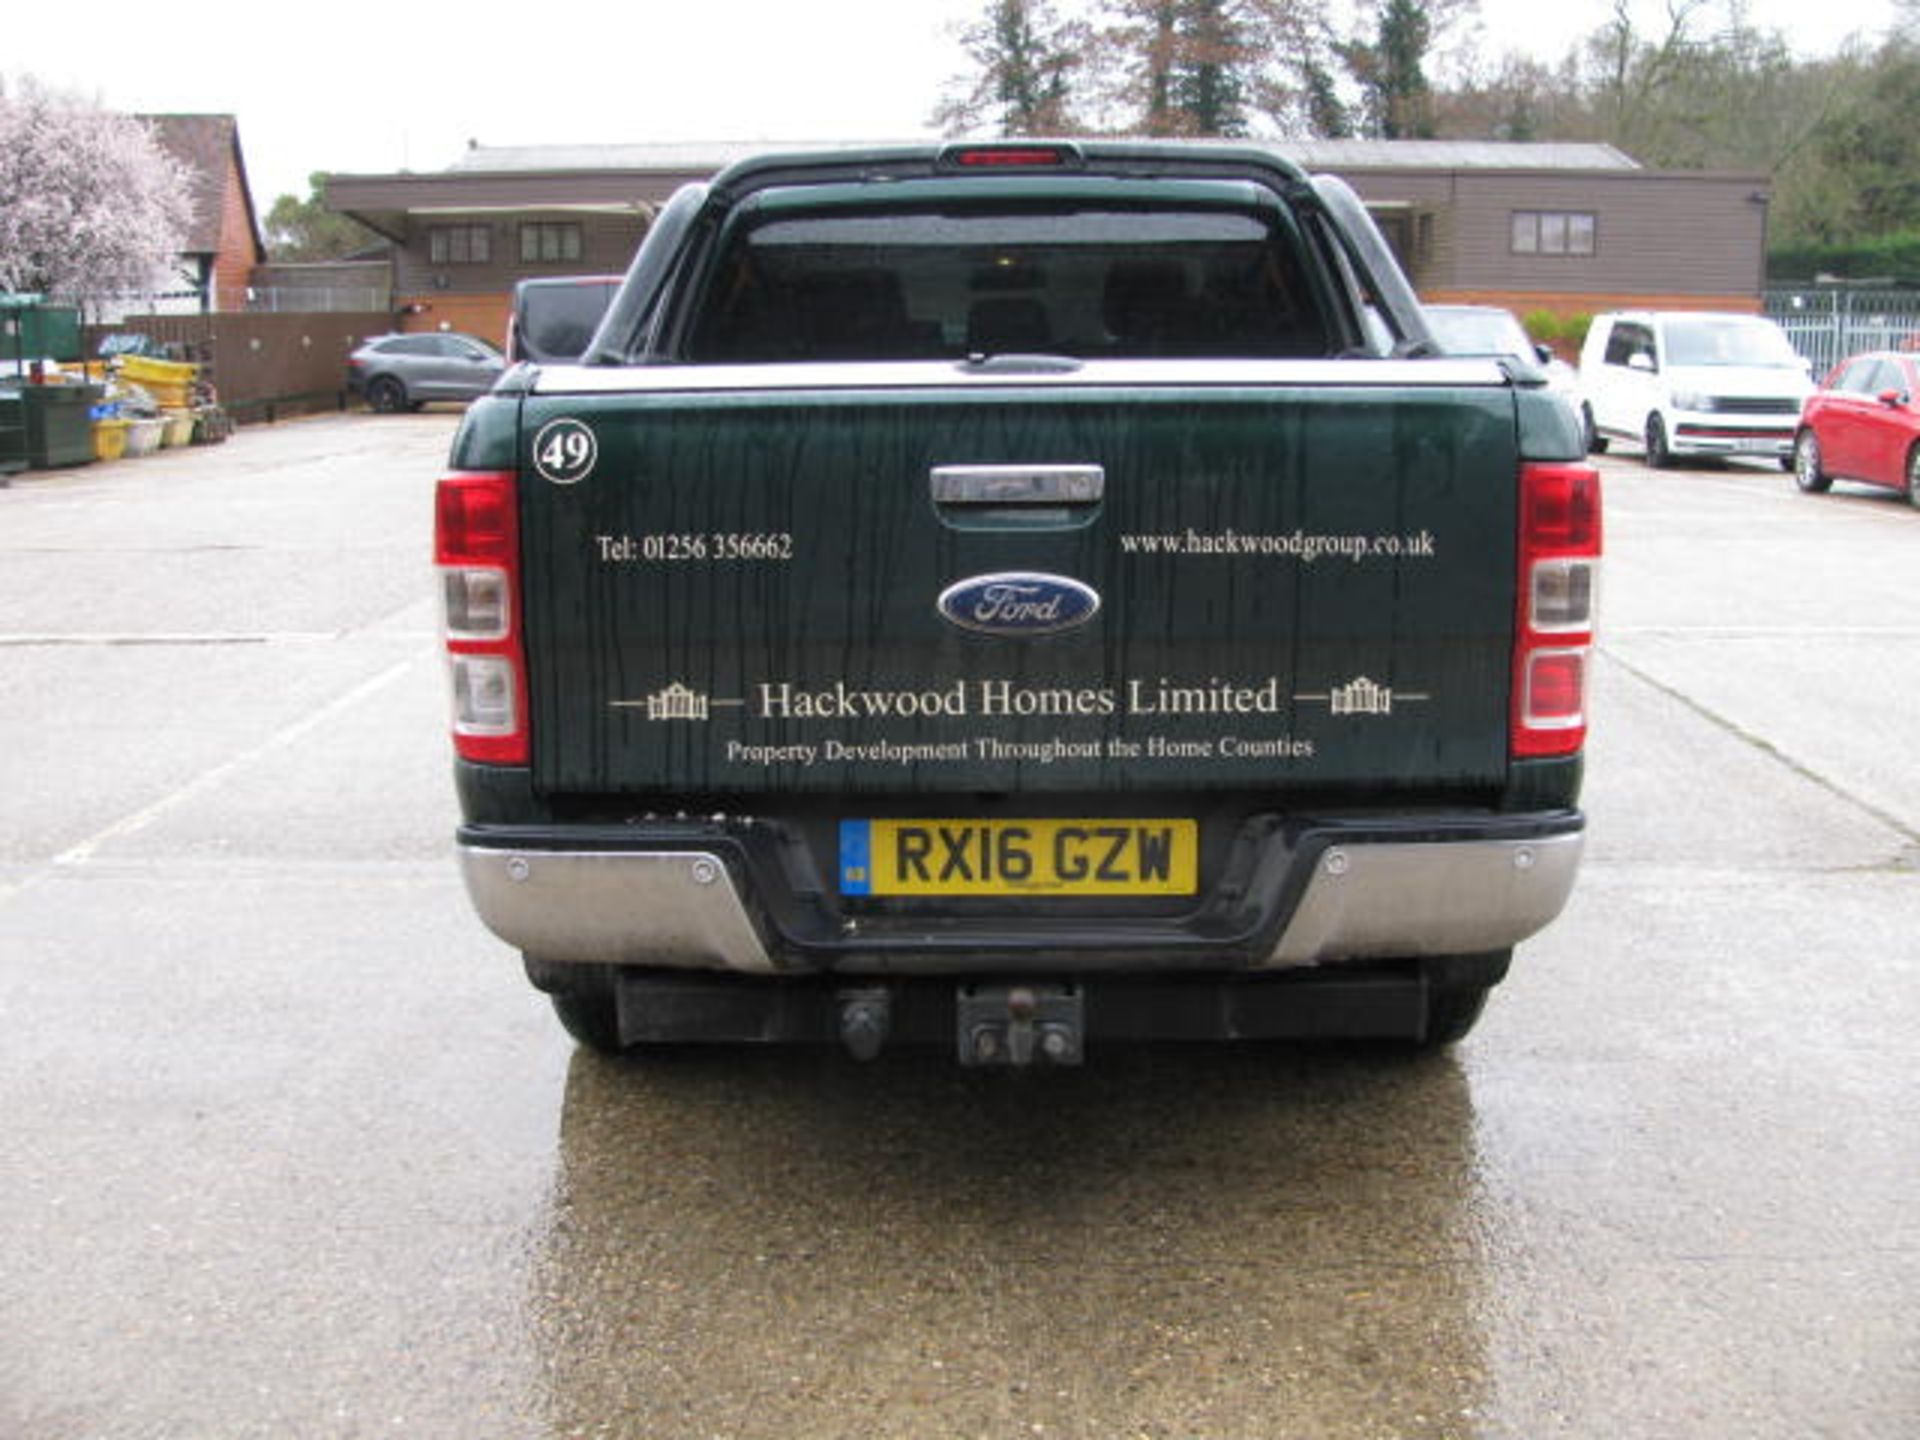 Ford Ranger Ltd 4x4 Double Cab 2.2D Pick Up, Registration No. RX16 GZW - Image 5 of 17